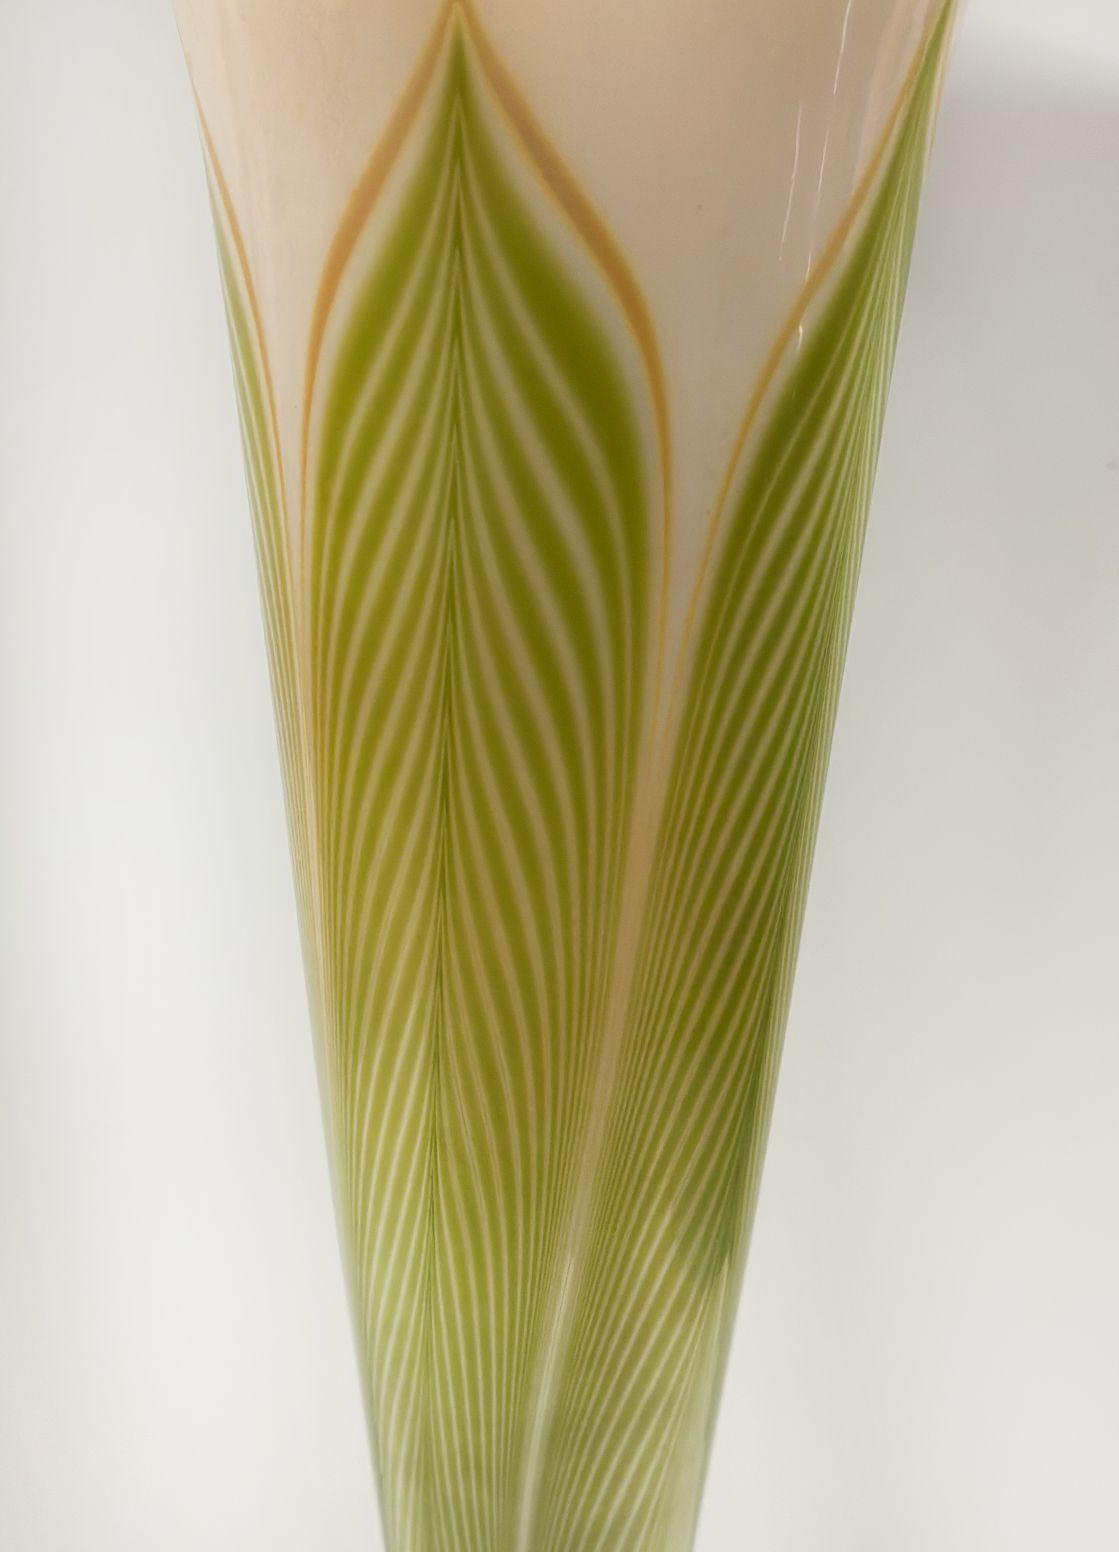 American Vintage L.C. Tiffany Studios Feathered Favrile Glass Vase, c. 1980's For Sale